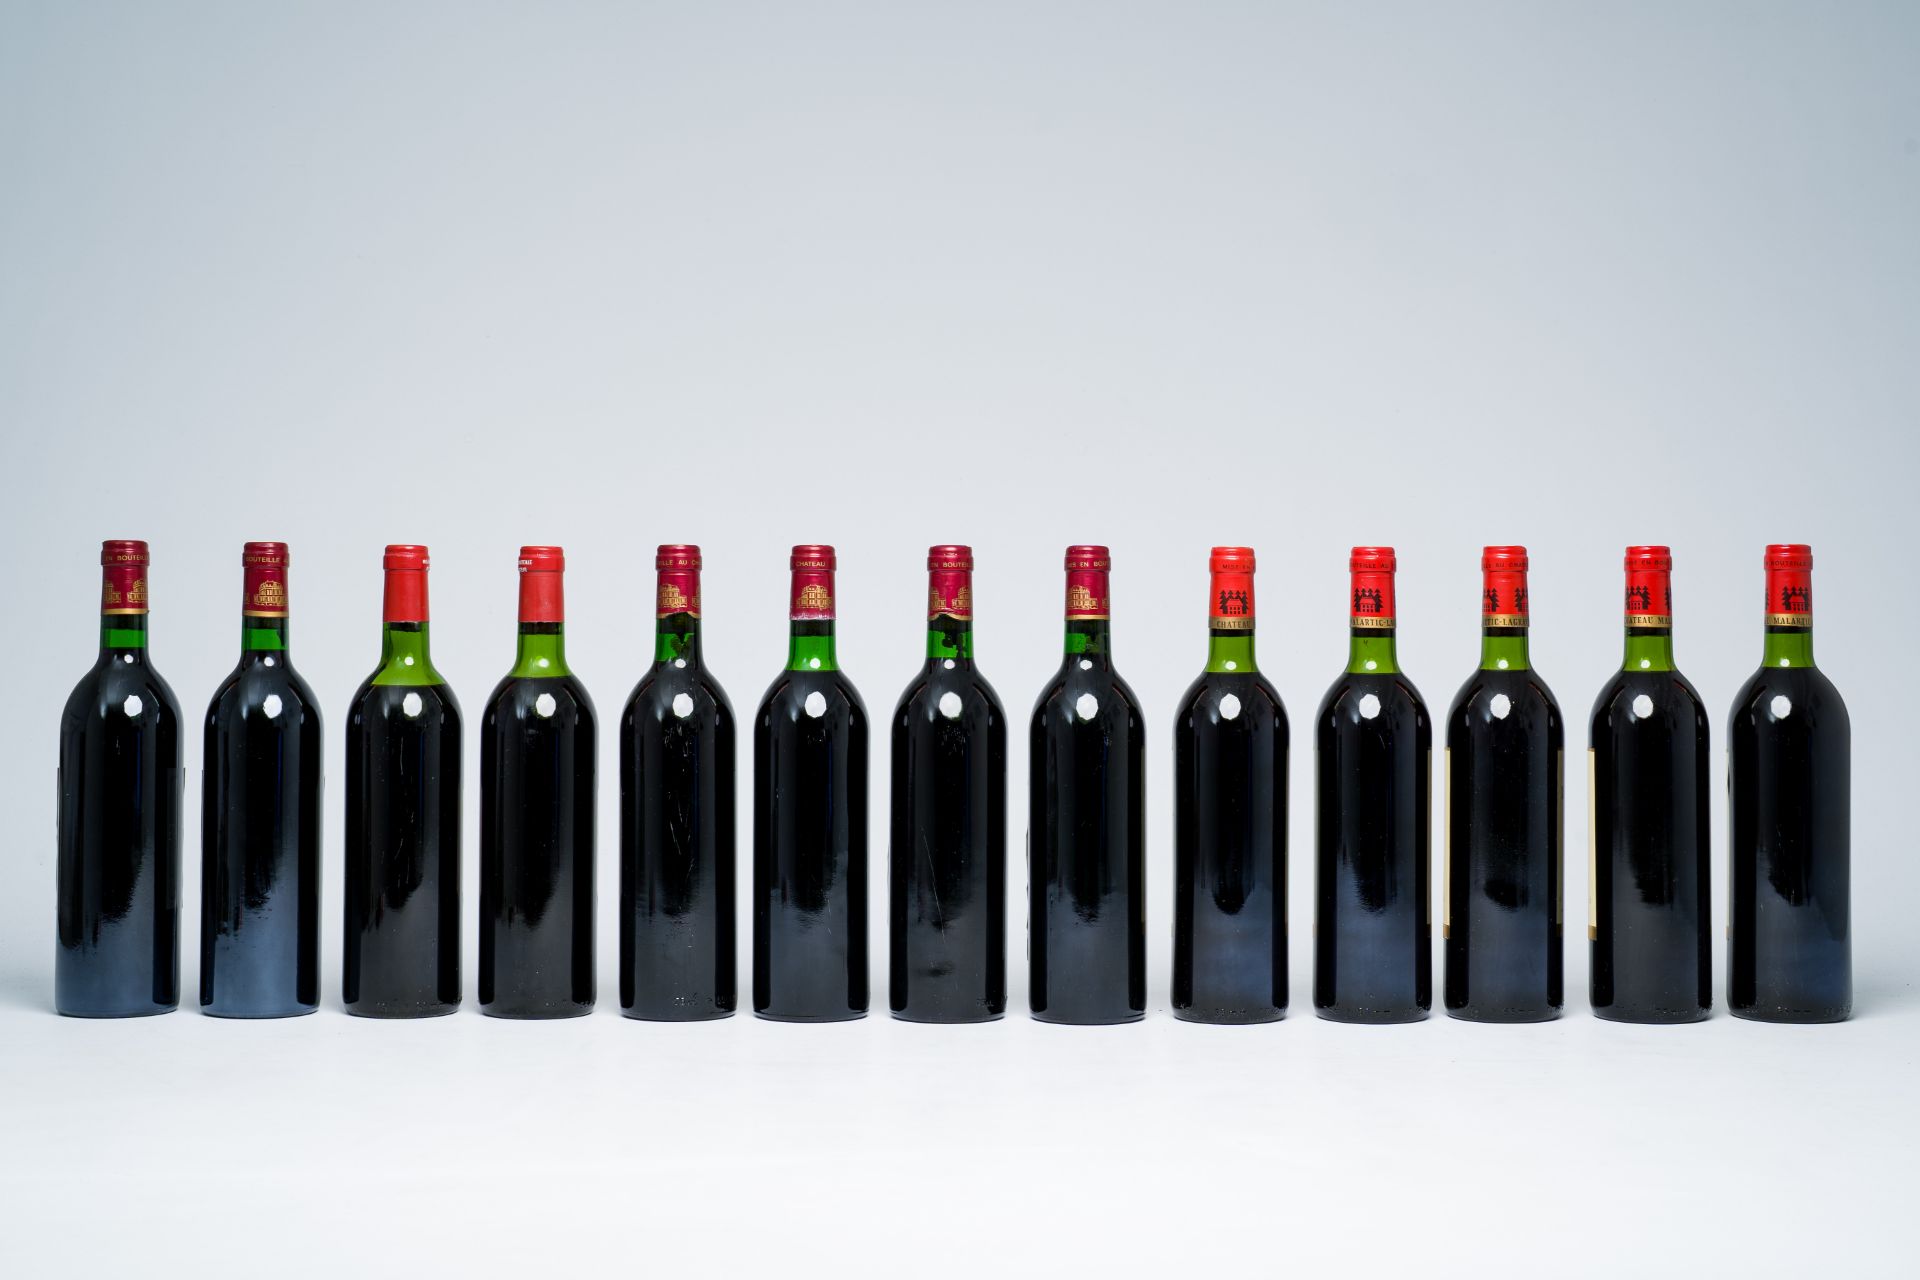 Five bottles of Chateau Malartic-Lagraviere, 4 bot. Ch. Taillefer Pomerol, 2 bot. Ch. Moulinet Pomer - Image 3 of 4